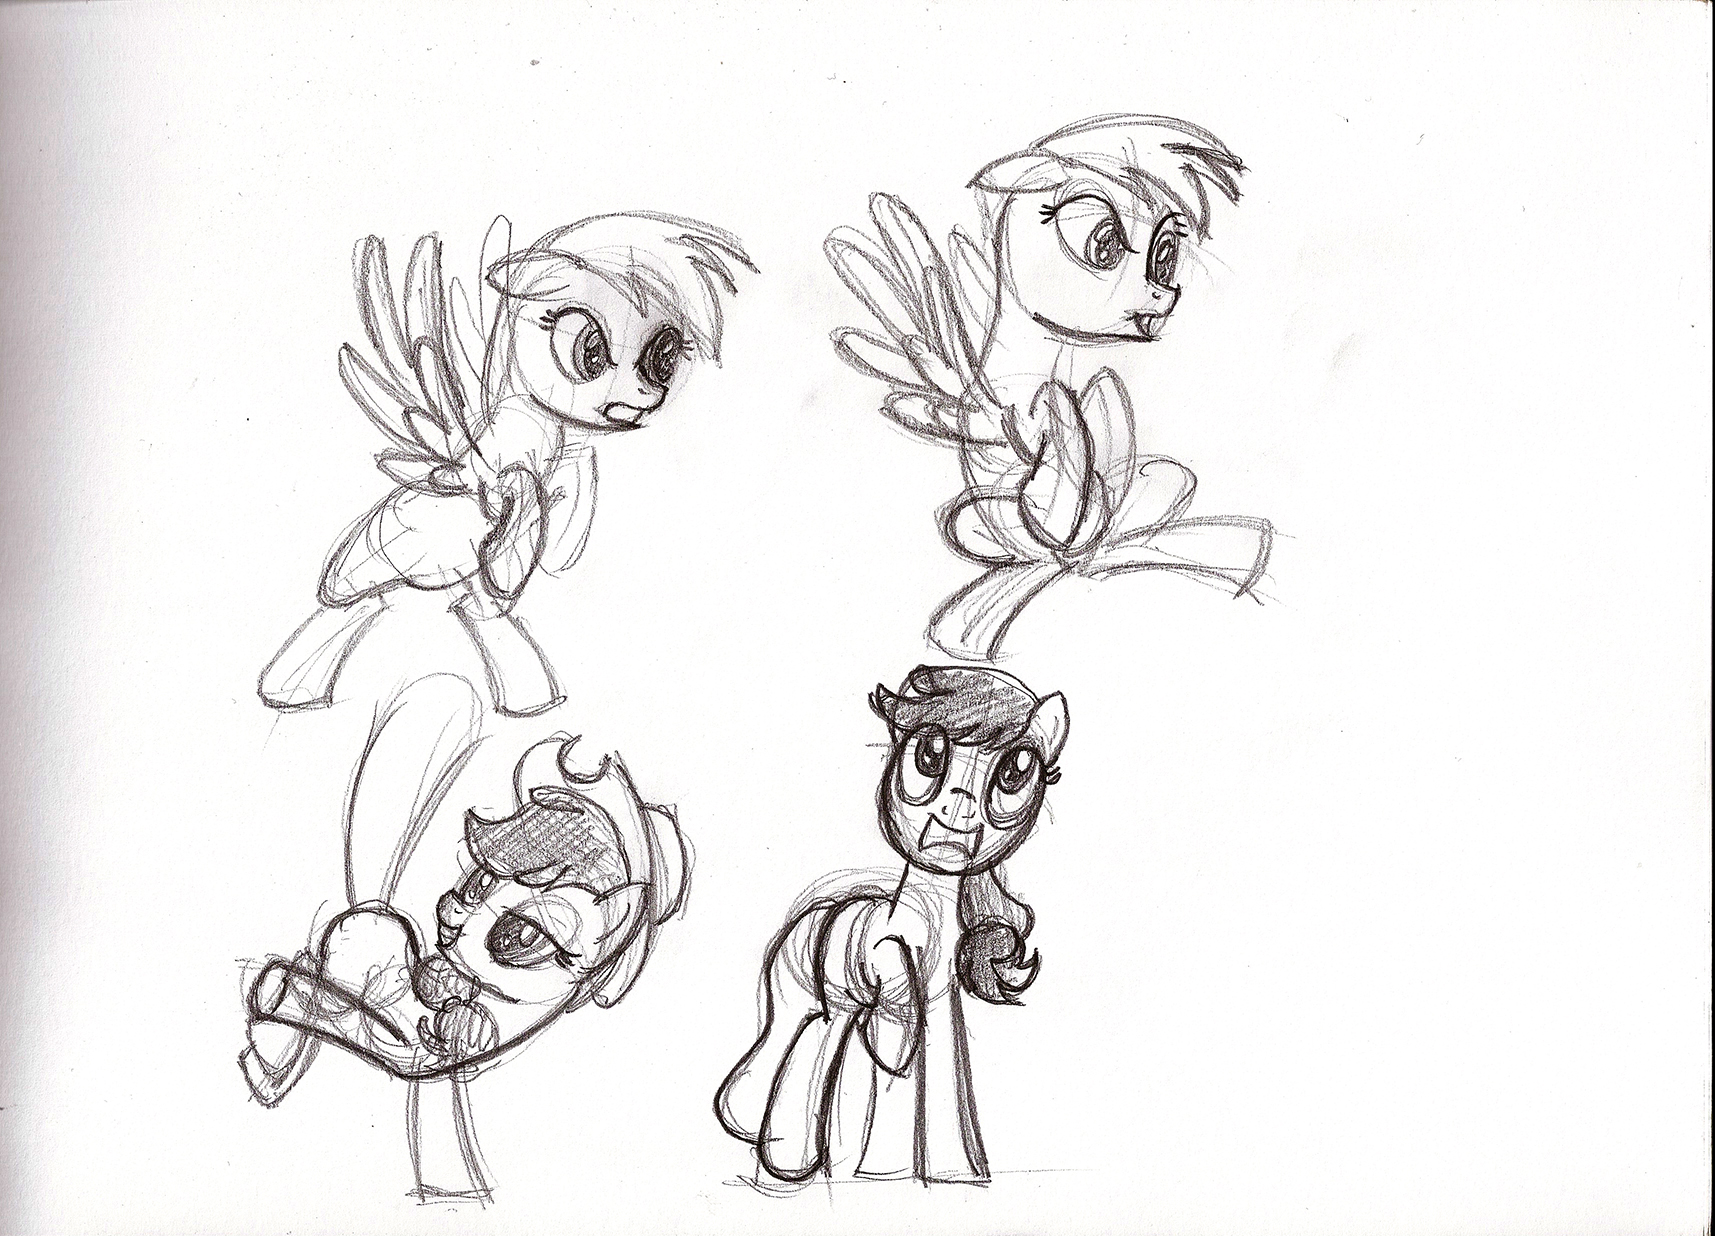 mlp_study_sketches___s1e6_by_maddermike-